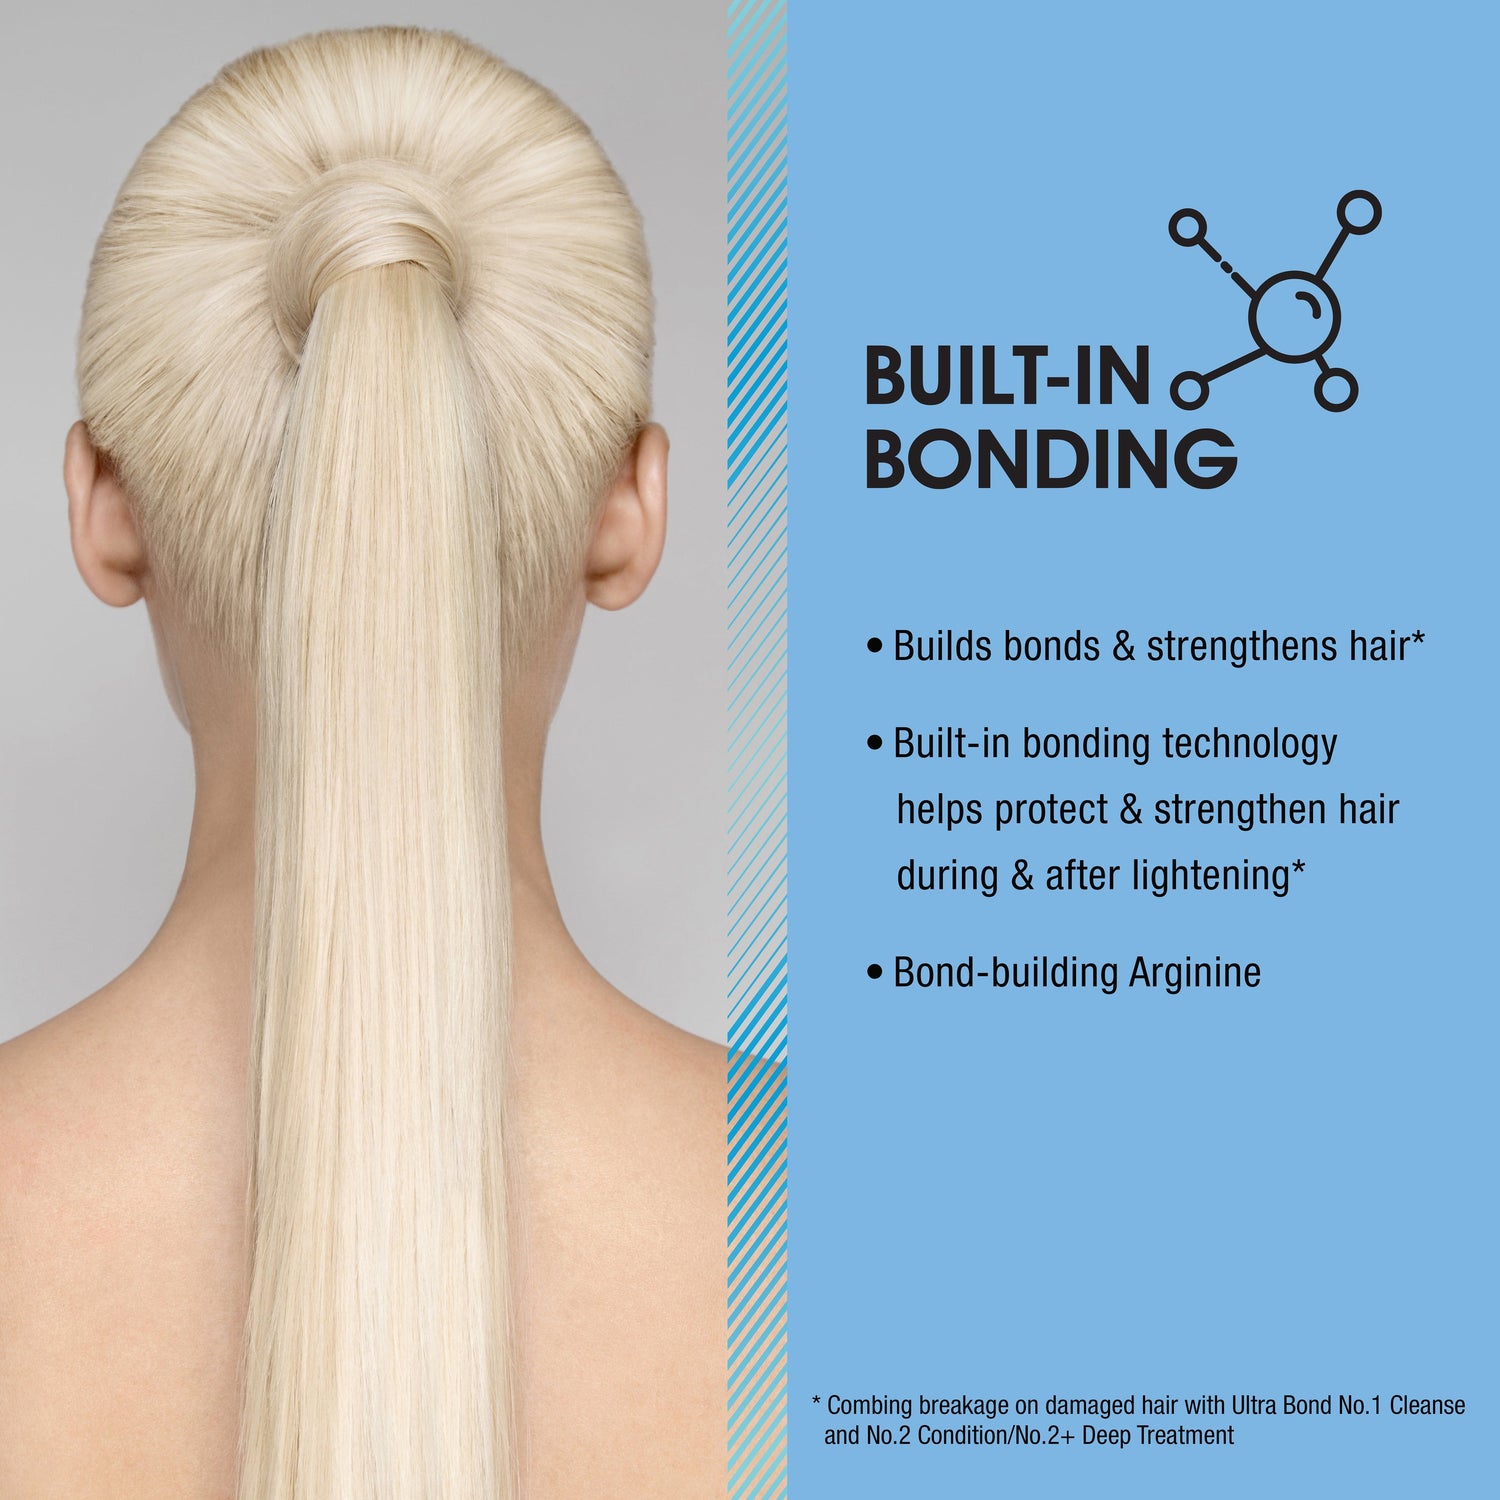 AGEbeautiful® Ultra Bond™ Overnight R&R Leave-in Treatment+ uses built in bonding technology to help protect and strengthen hair during and after lightening